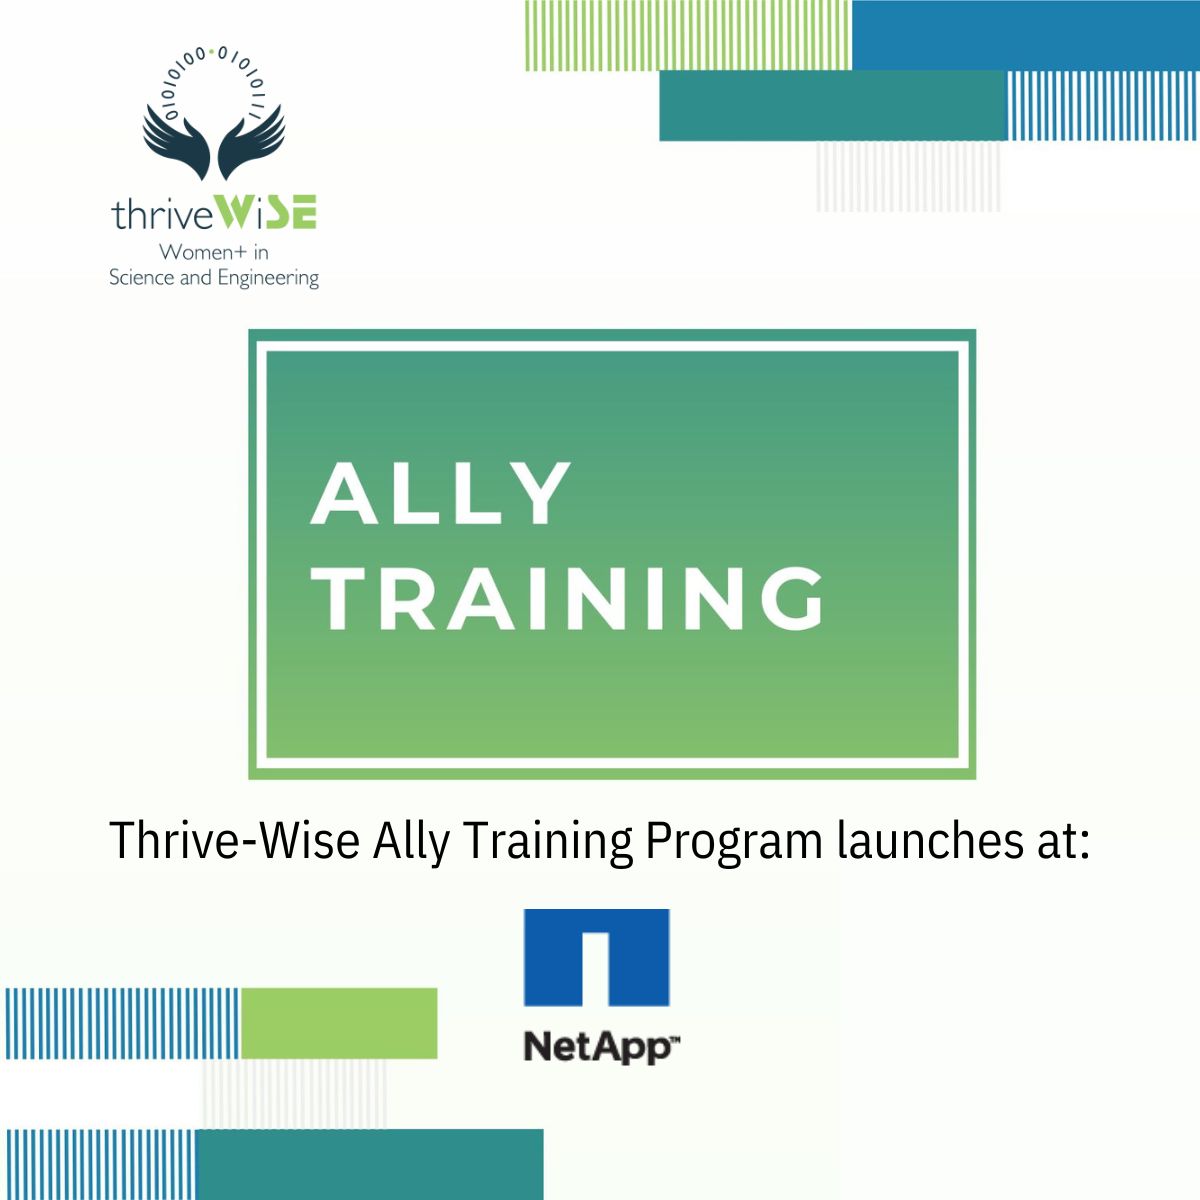 We are thrilled to share that @NetApp has deployed our Ally Training to foster a more inclusive environment for women+ & minorities in tech: bit.ly/4cdMvGc
#Allyship #TechInclusion #Heforshe #TechAlly #WomenInTech #DiversityInTech #maleallies #mensupportingwomen